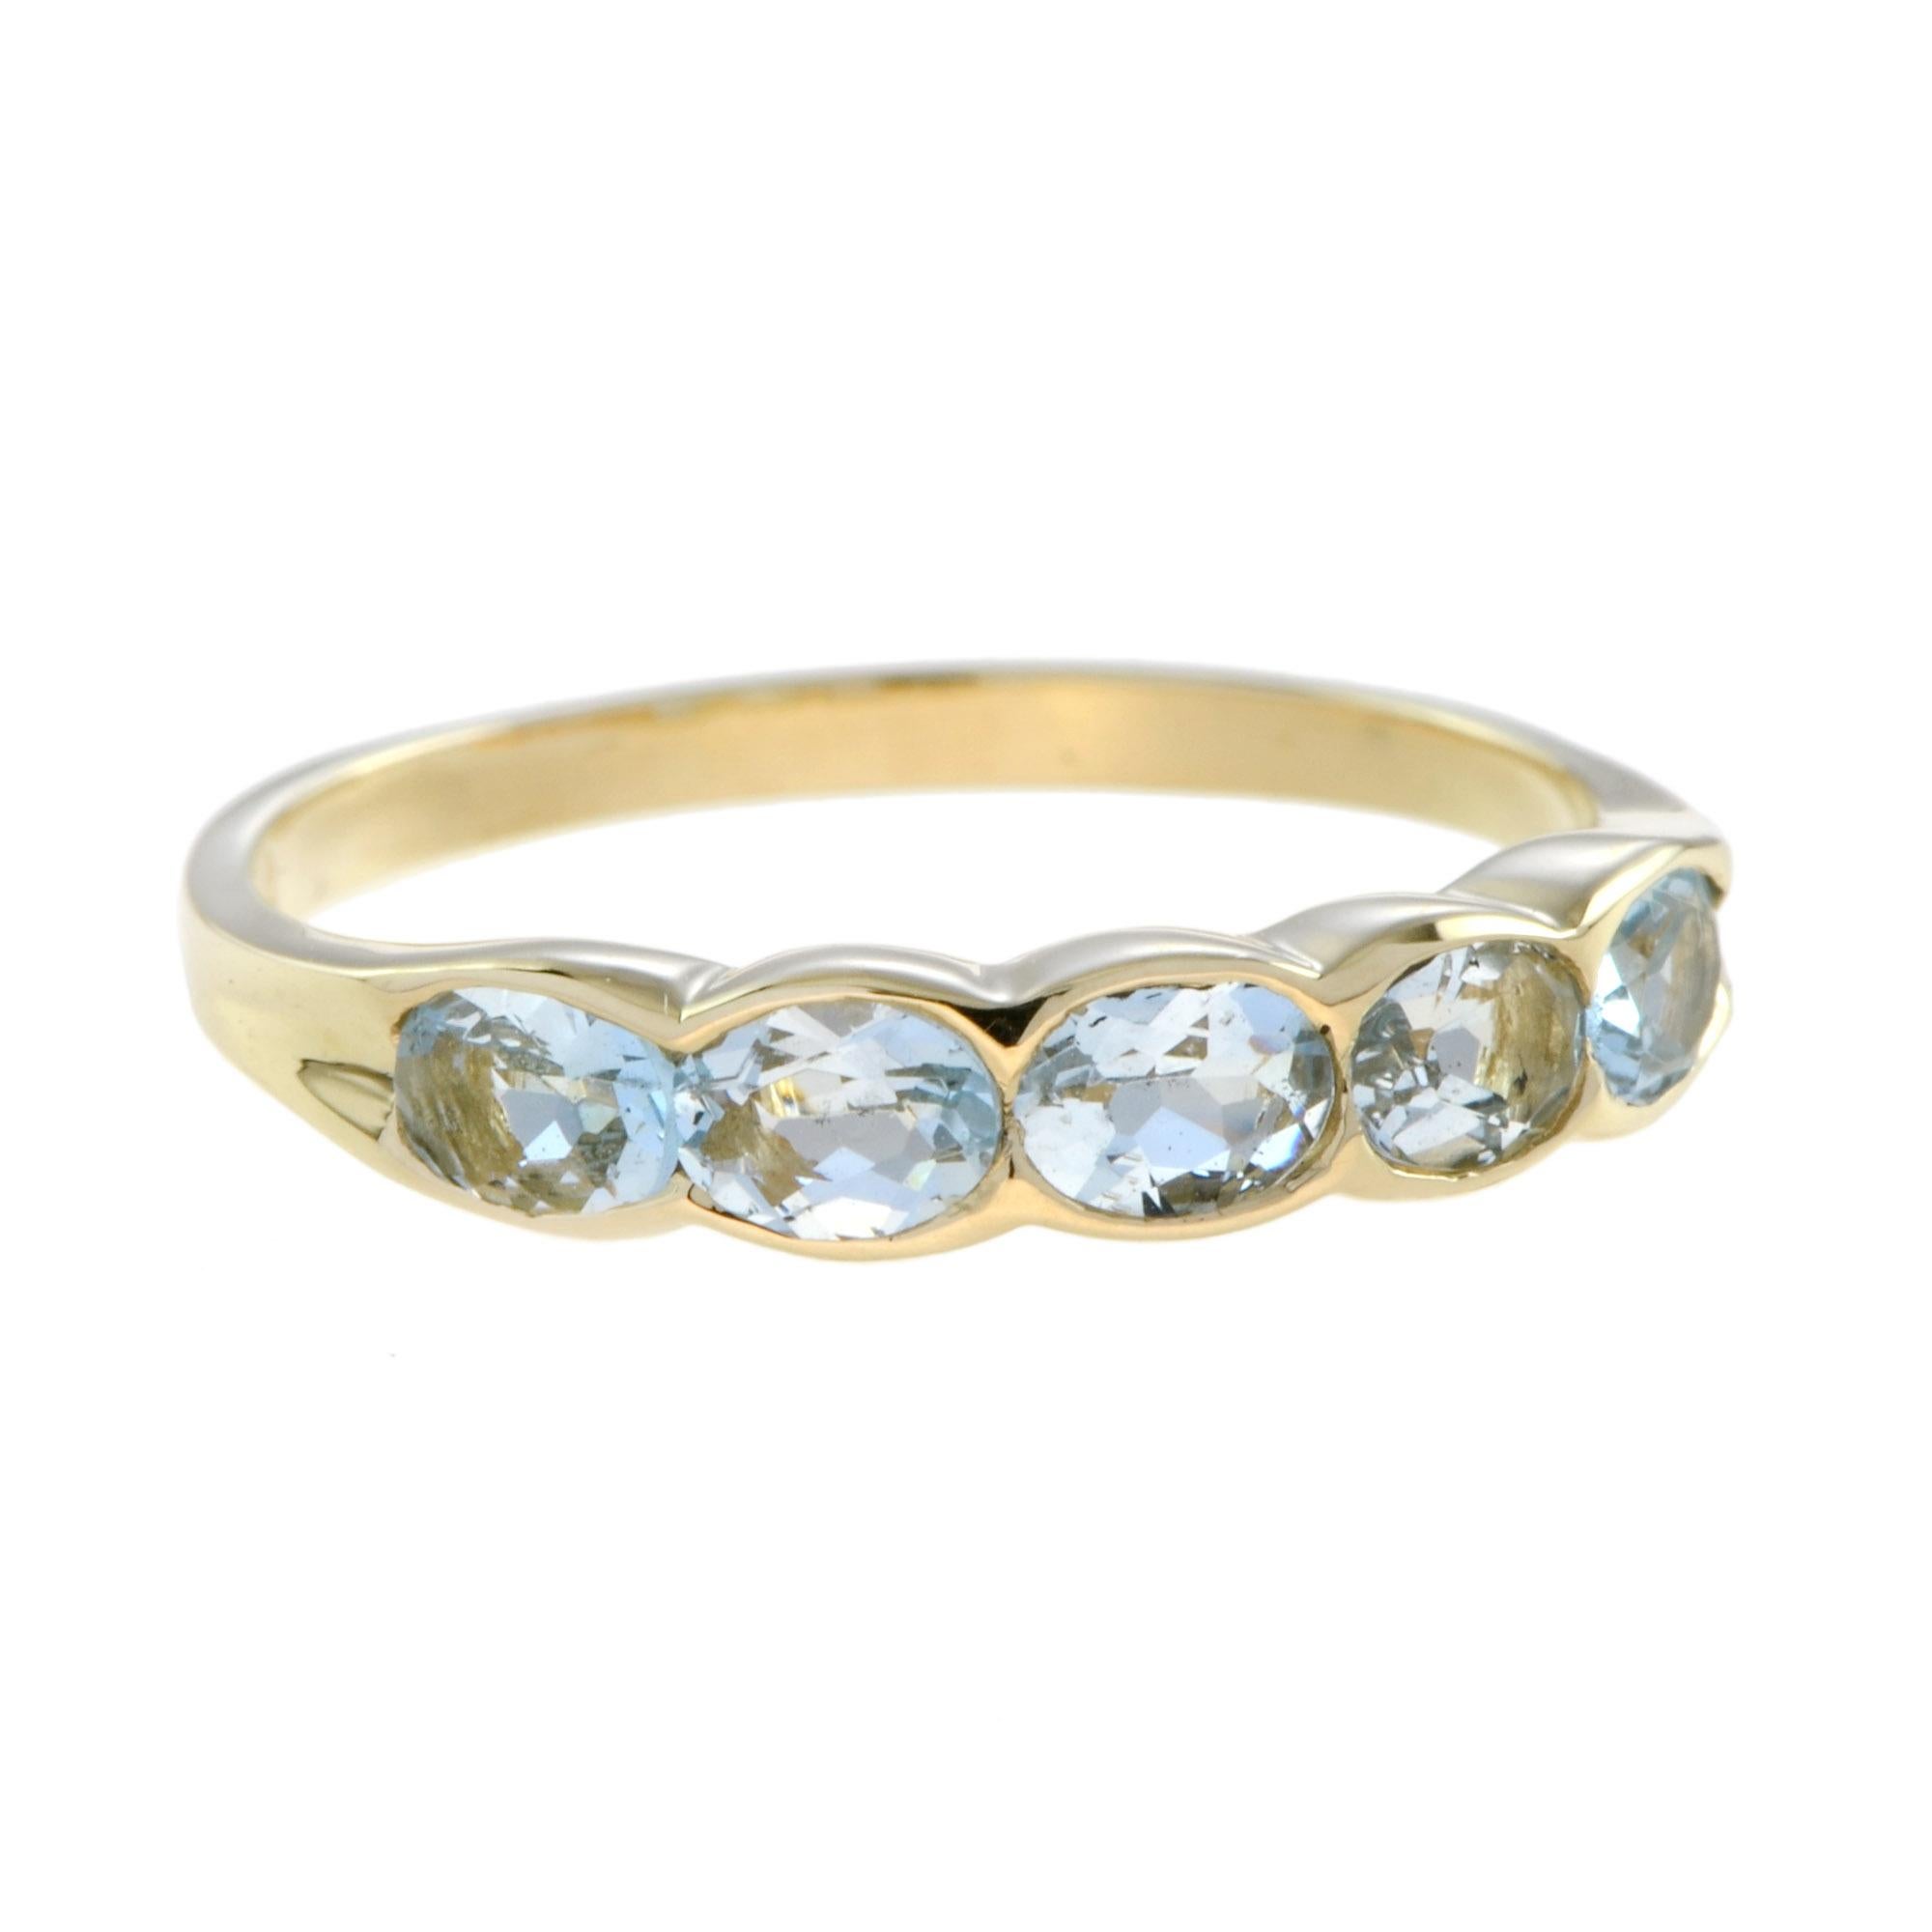 For Sale:  Vintage Style Aquamarine Five Stone Ring in 14K Yellow Gold 2